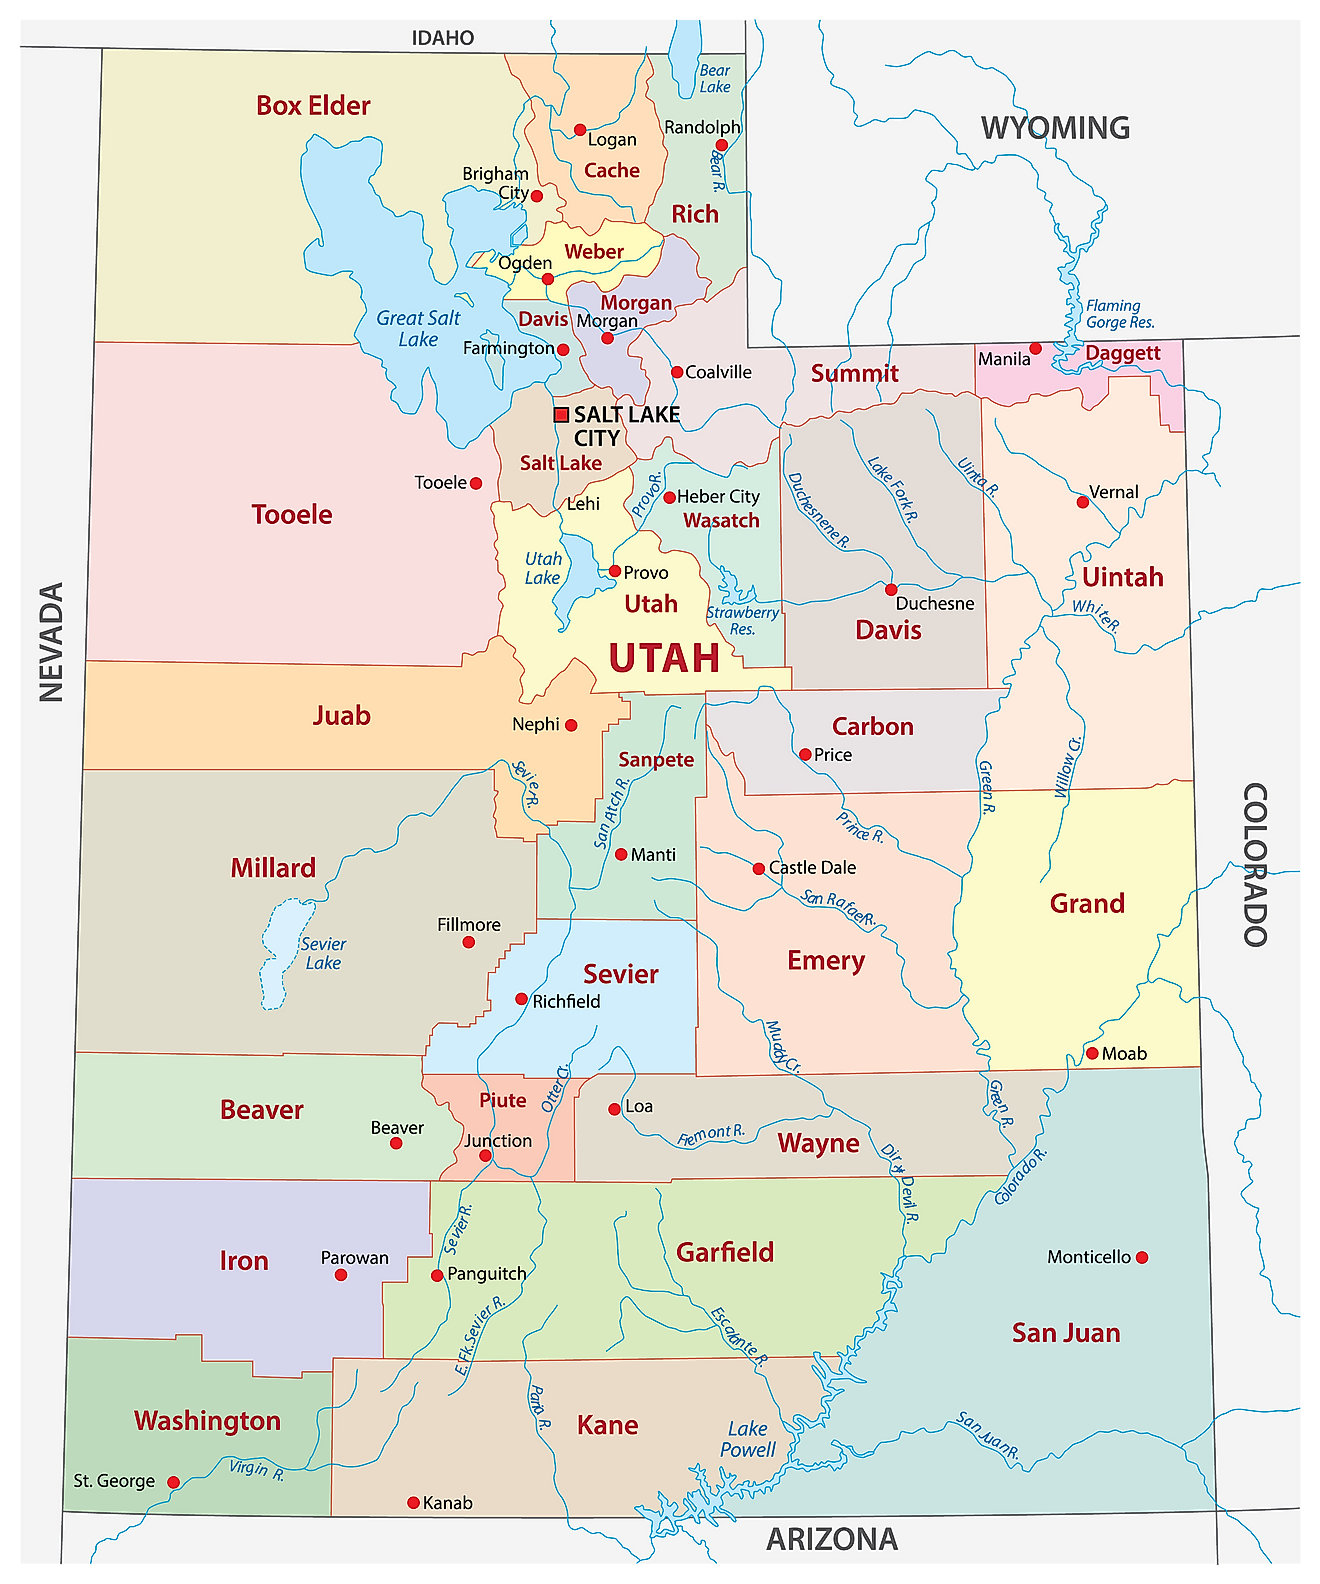 Administrative Map of Utah showing its 29 counties and the capital city - Salt Lake City